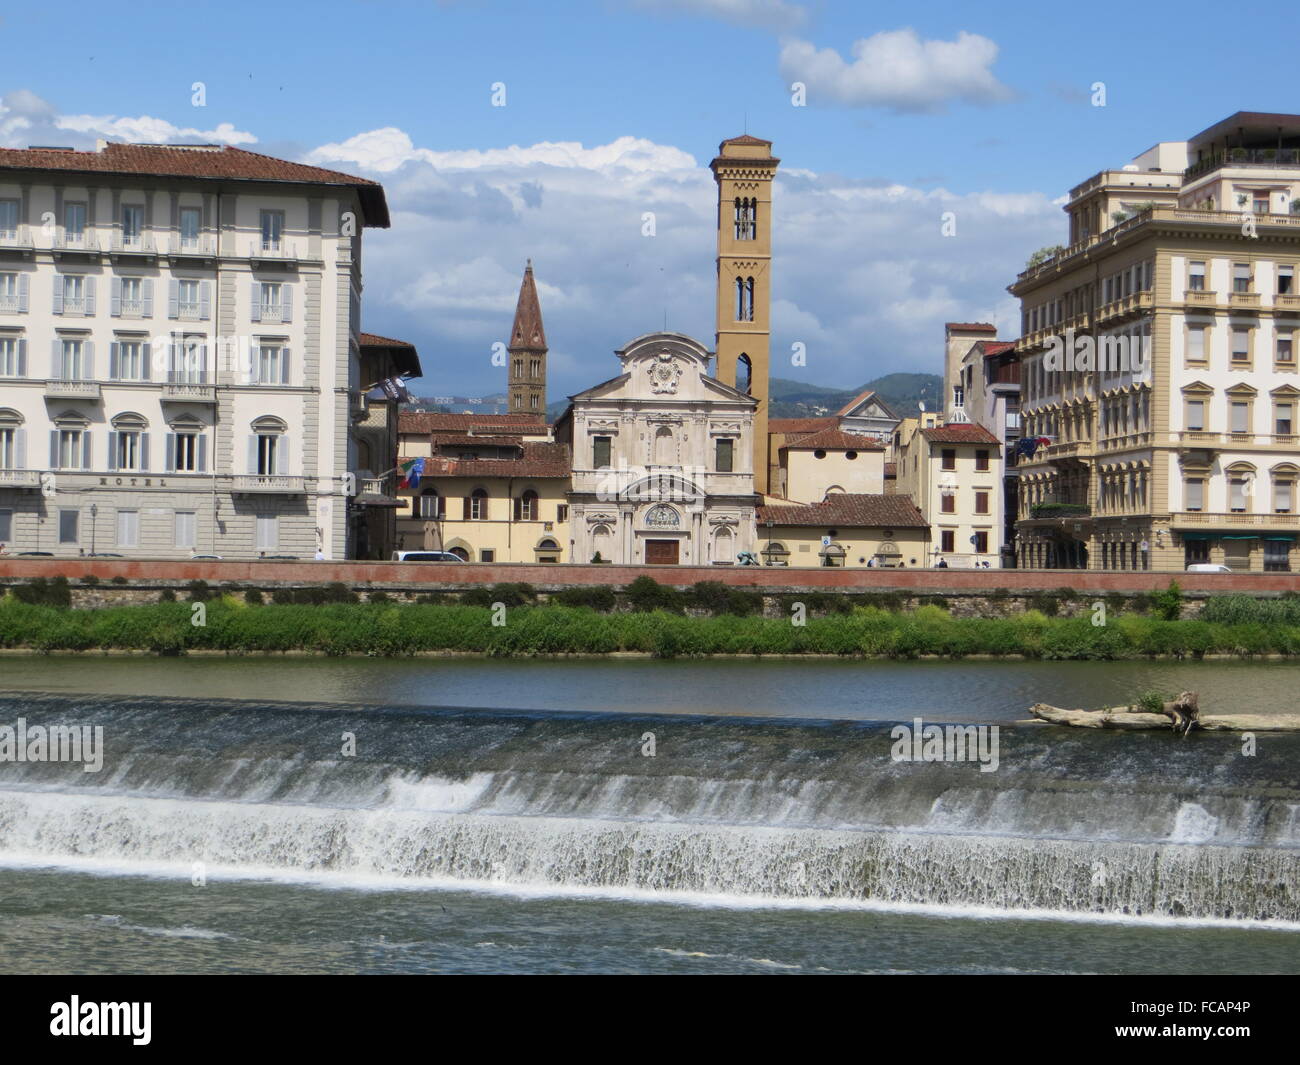 The weir over the River Arno in Florence, looking into the city. Stock Photo